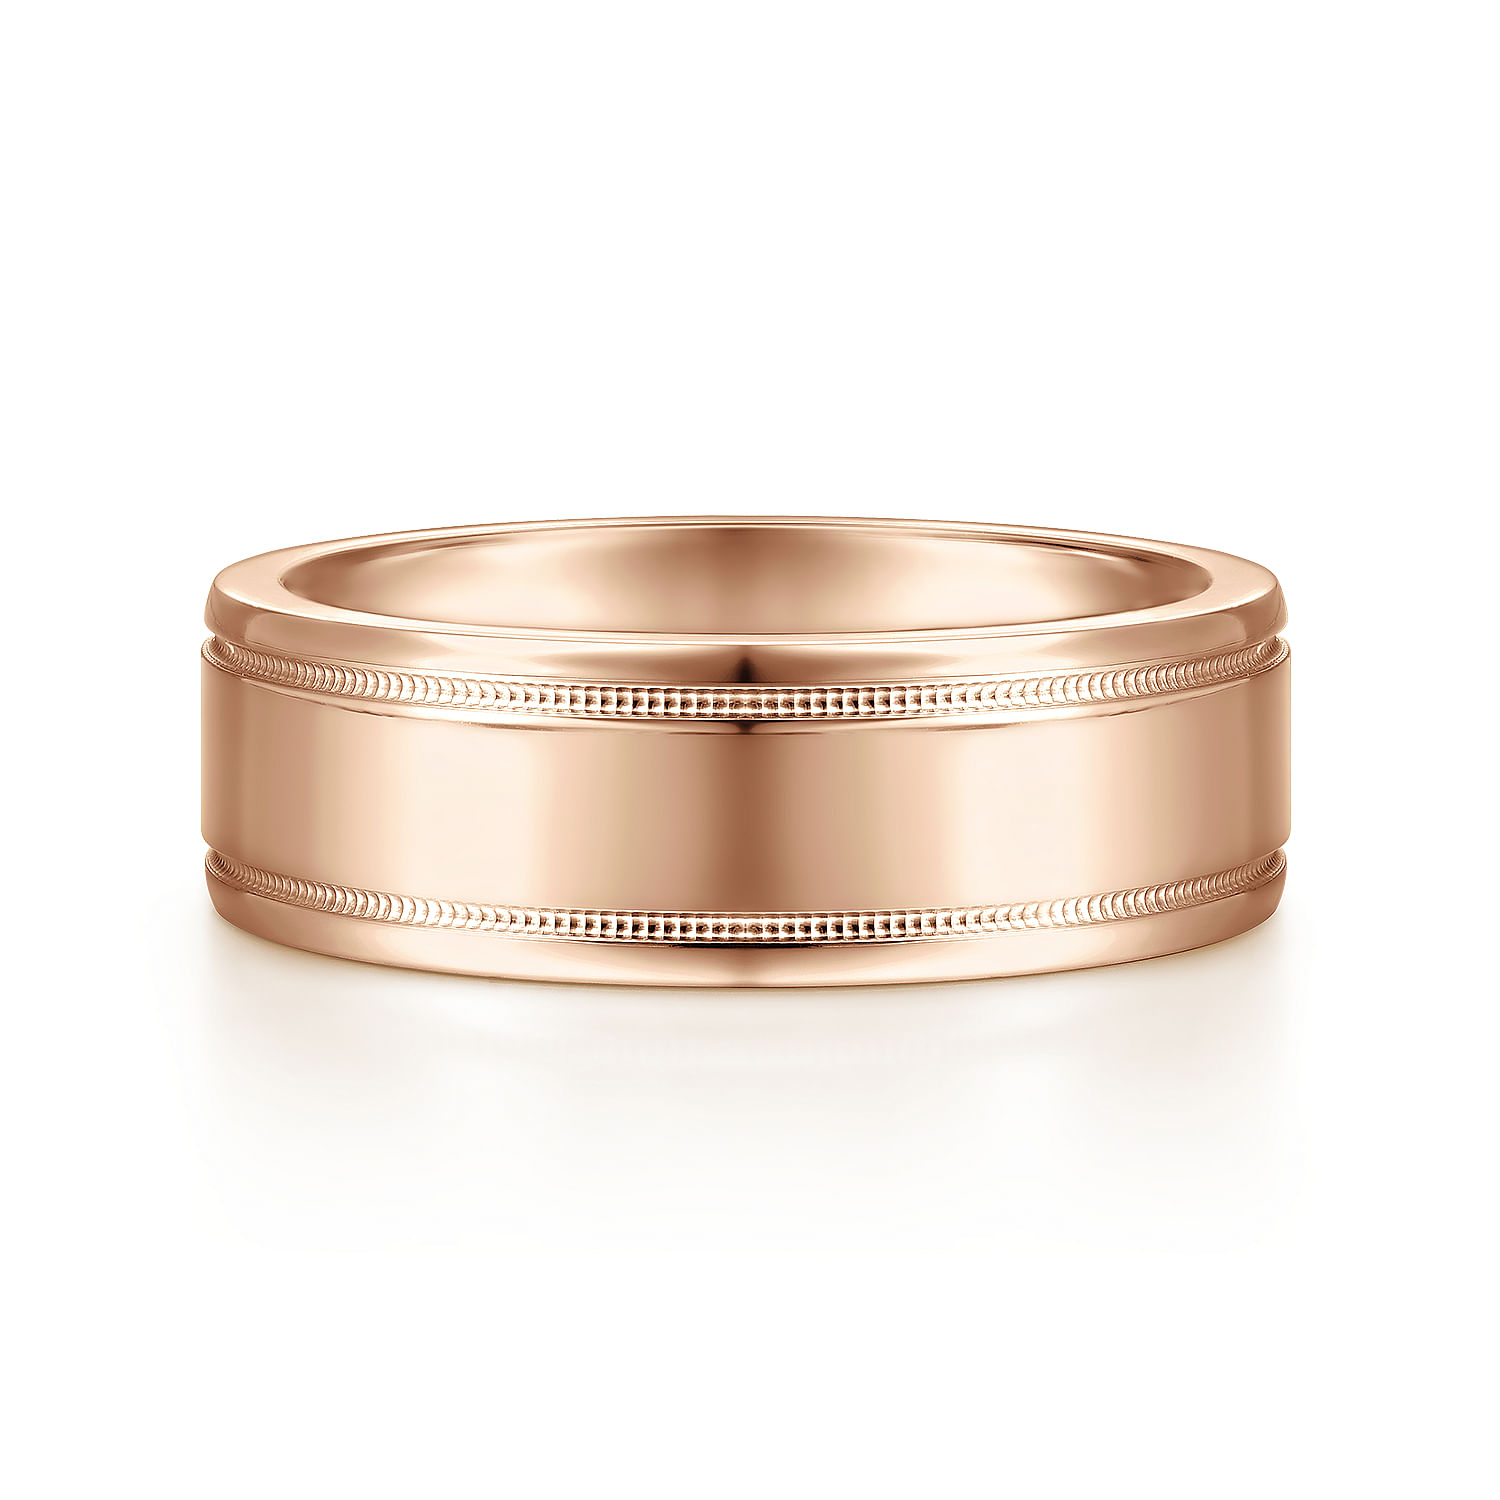 Fred - 14K Rose Gold 7mm -  High Polished Men's Wedding Band with Millgrain